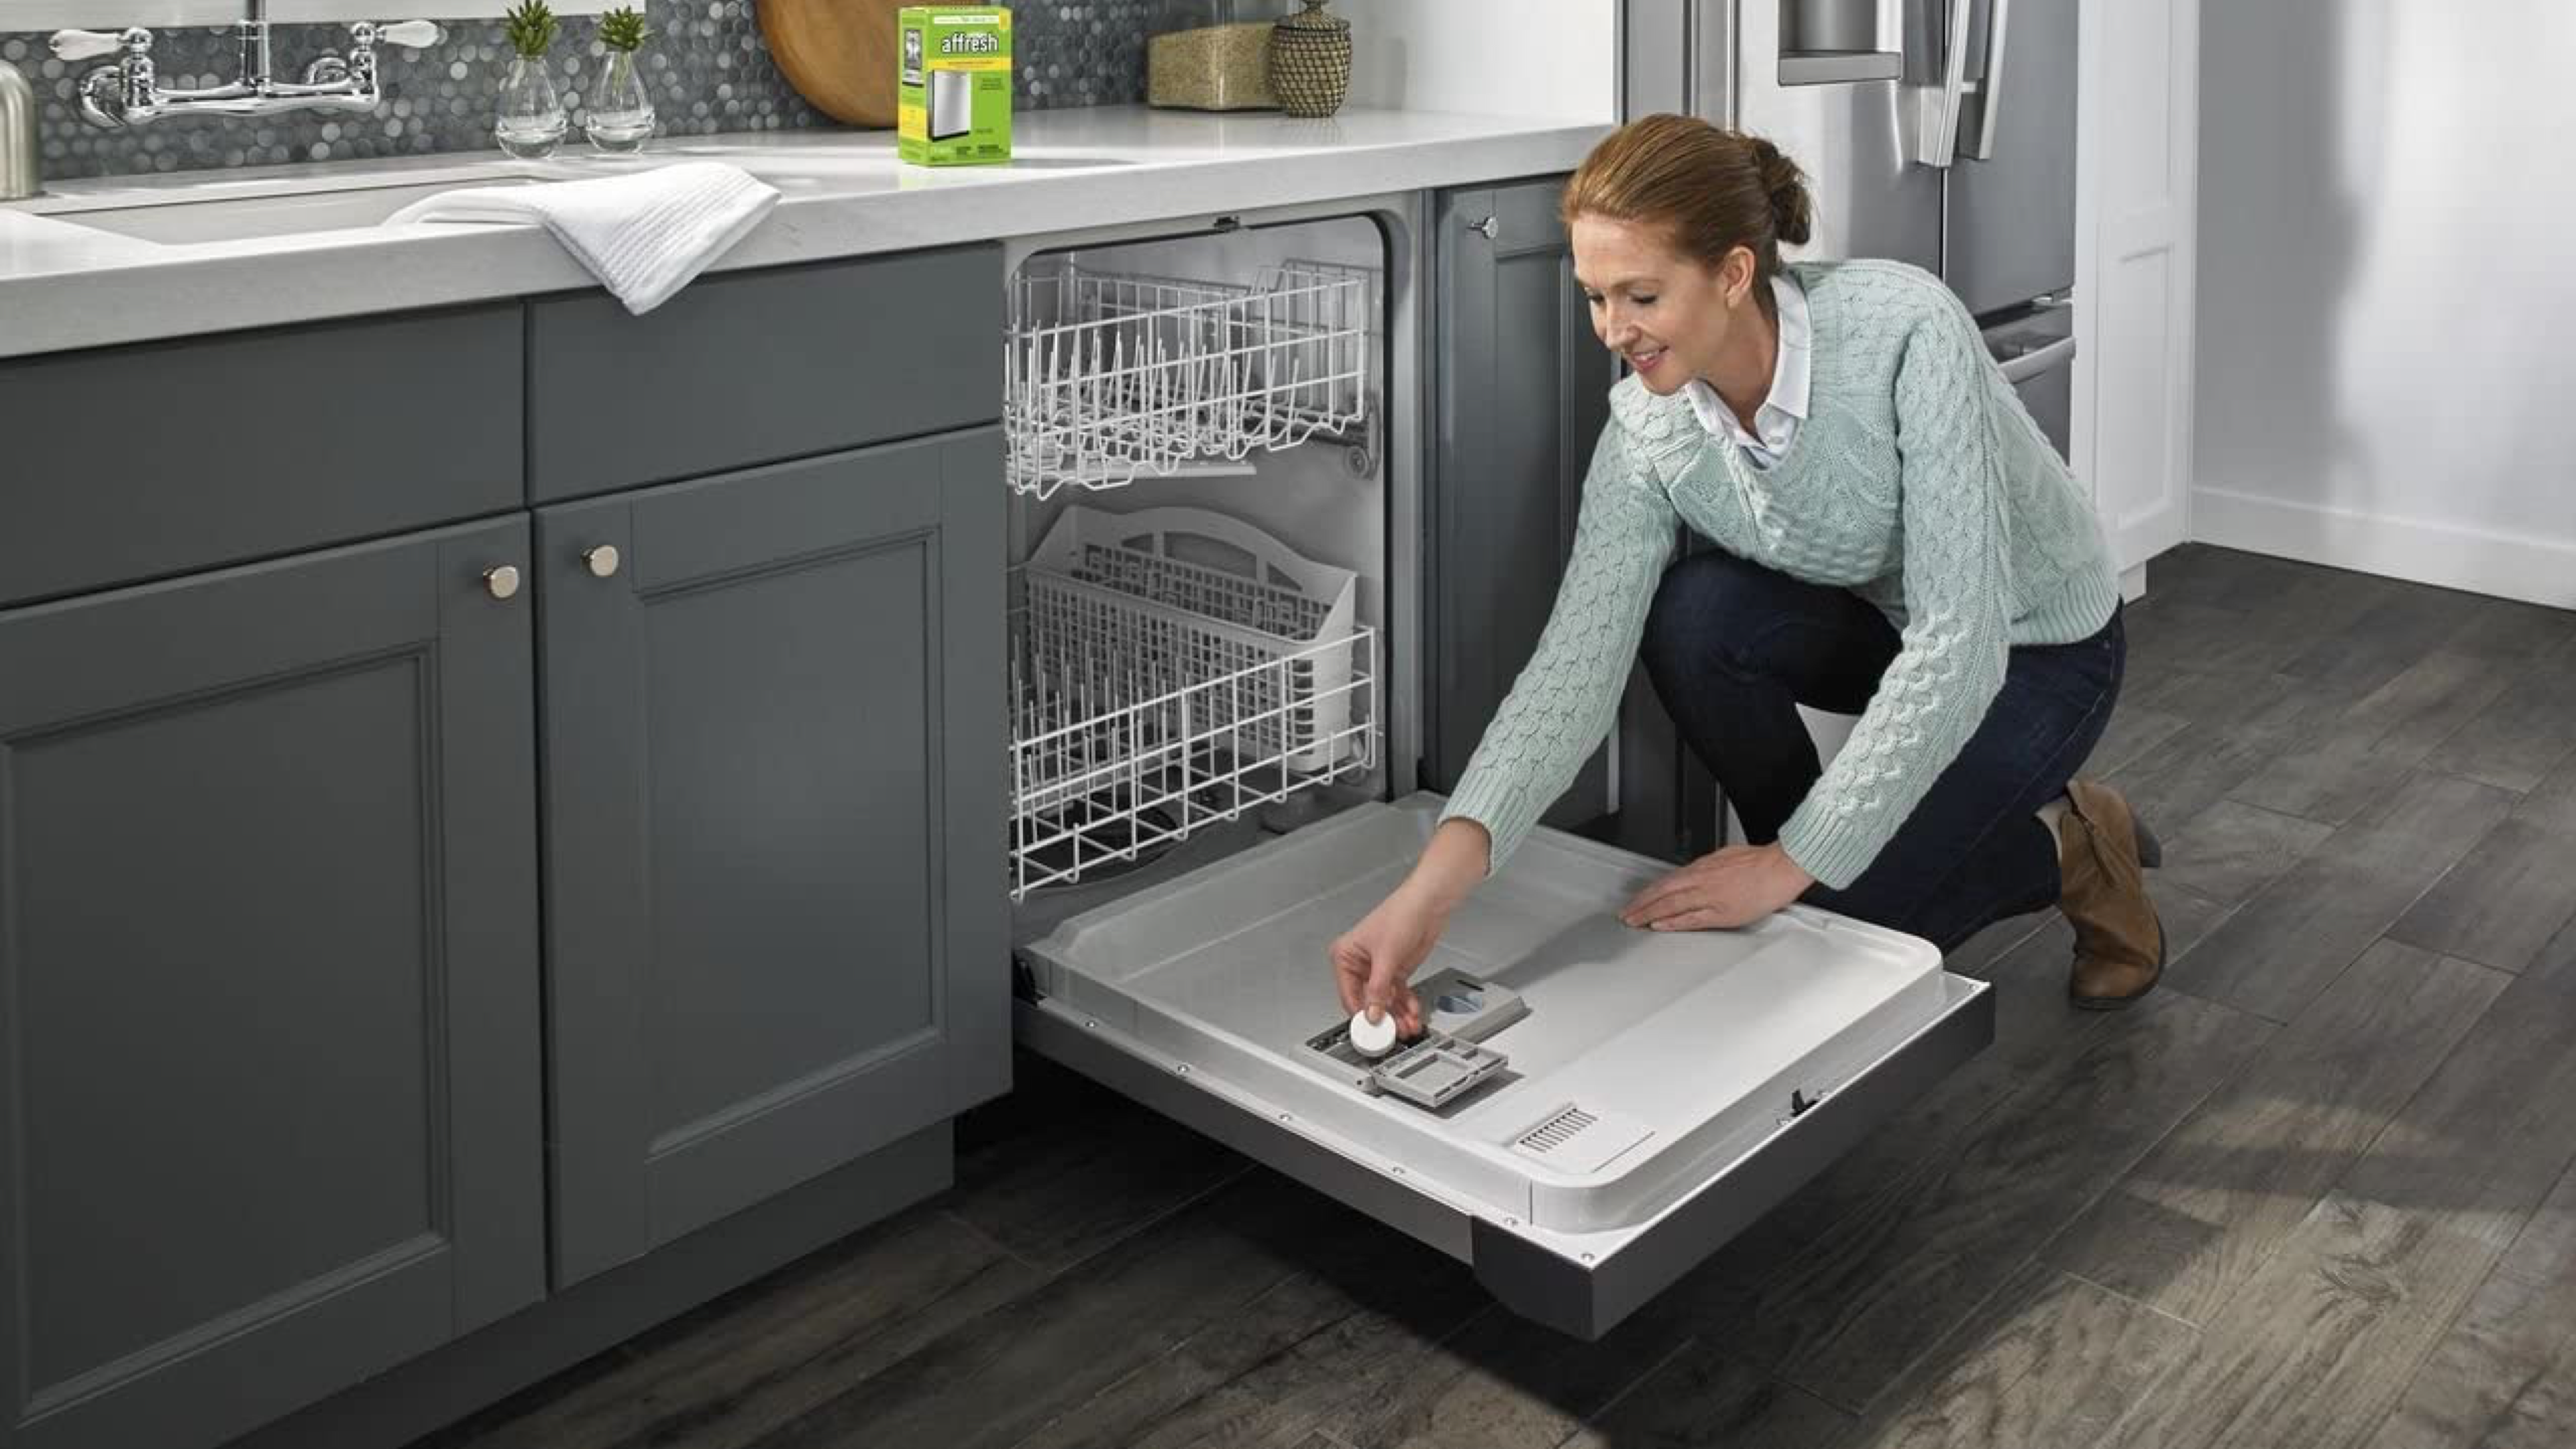 tablets that can help clear dishwasher grime buildup